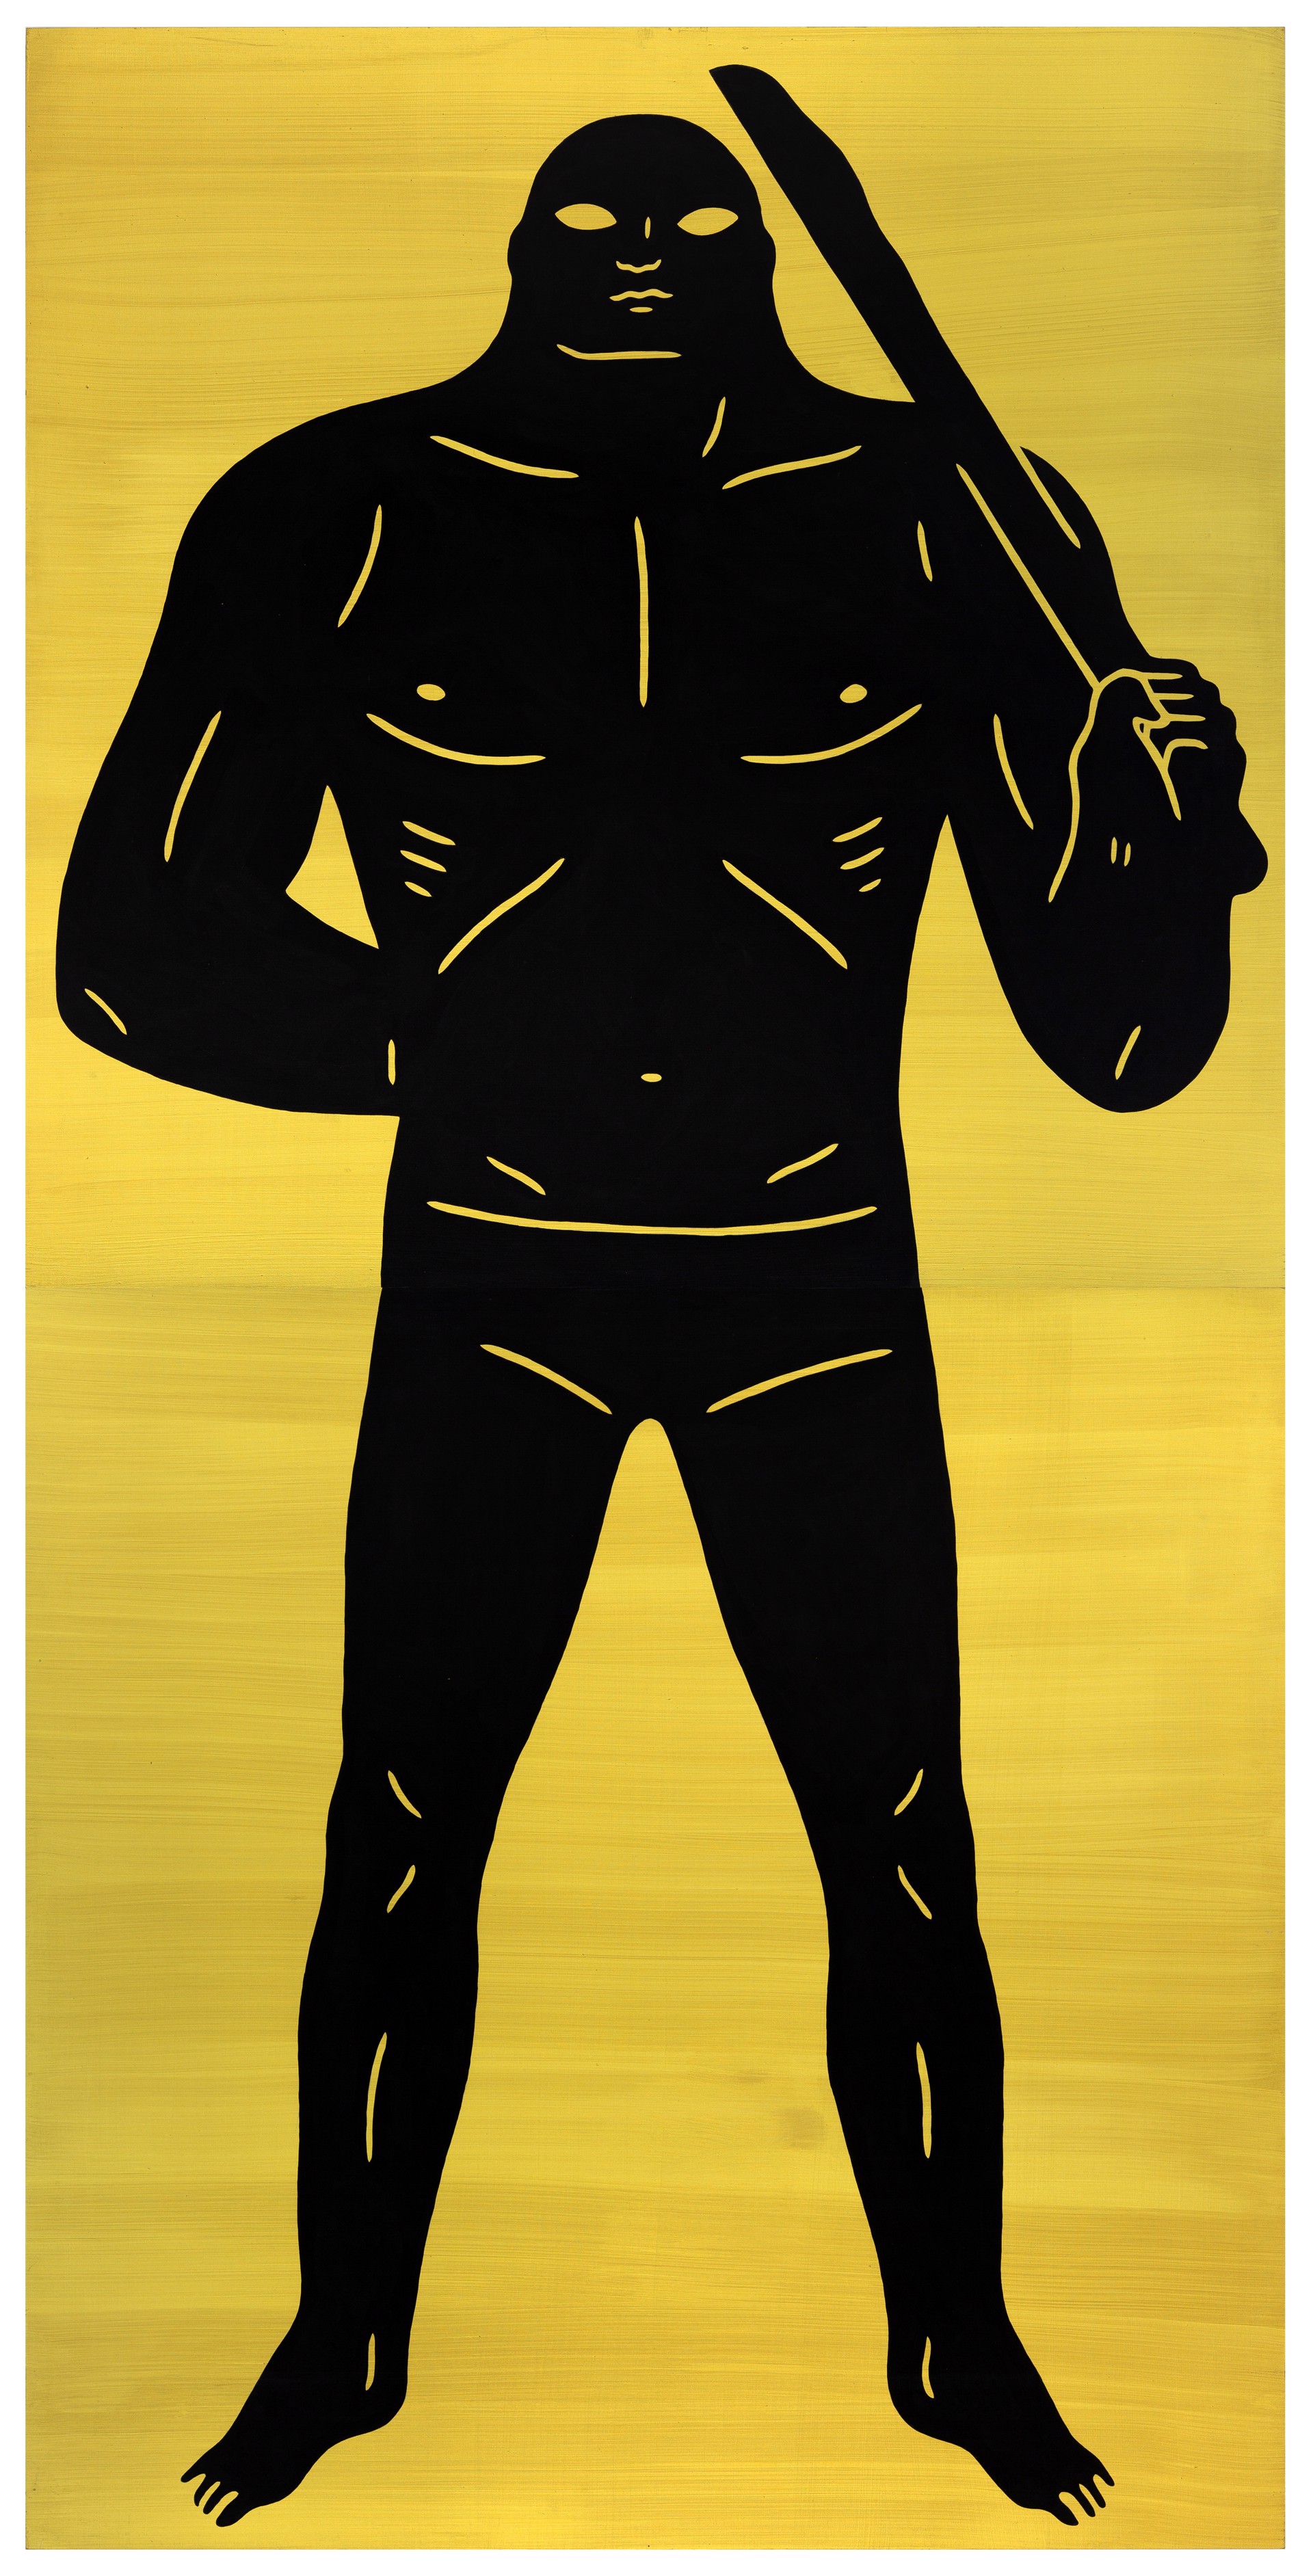 Untitled (Soldier) by Cleon Peterson